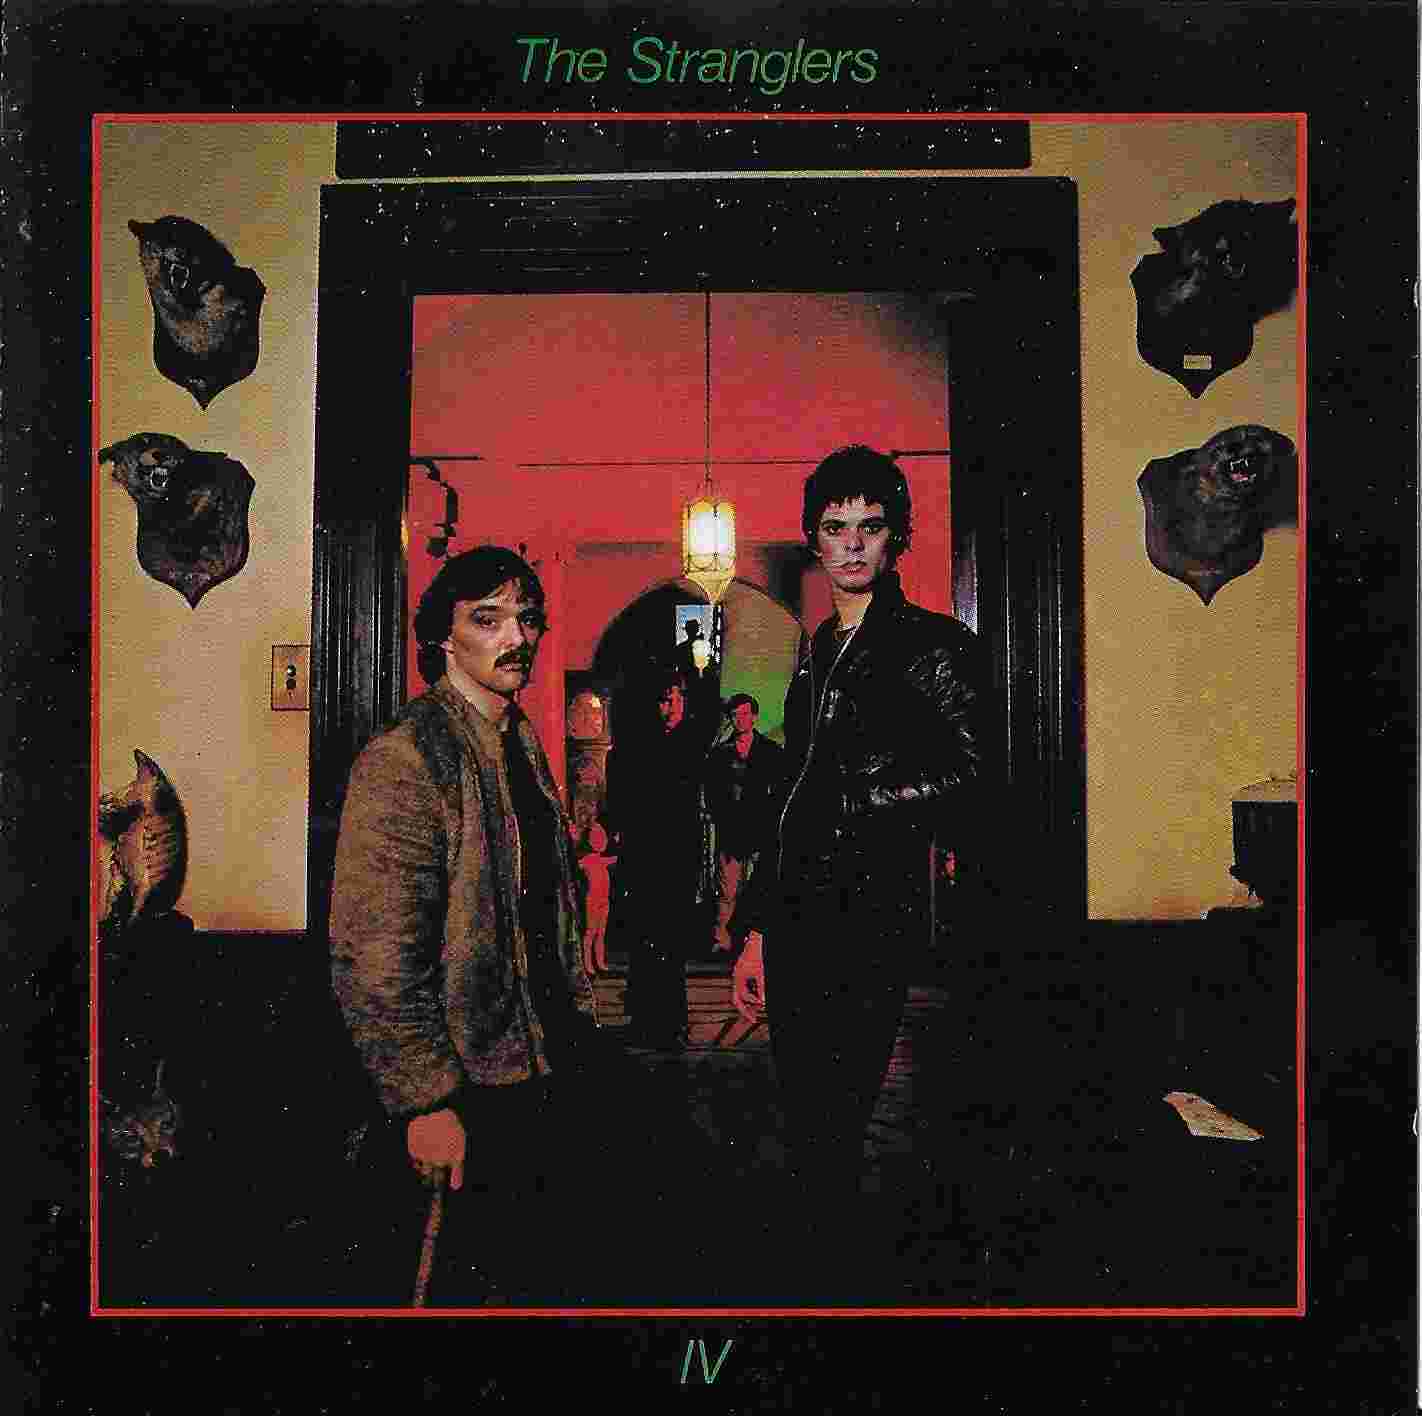 Picture of CDP 746362 2 Rattus norvegicus by artist The Stranglers